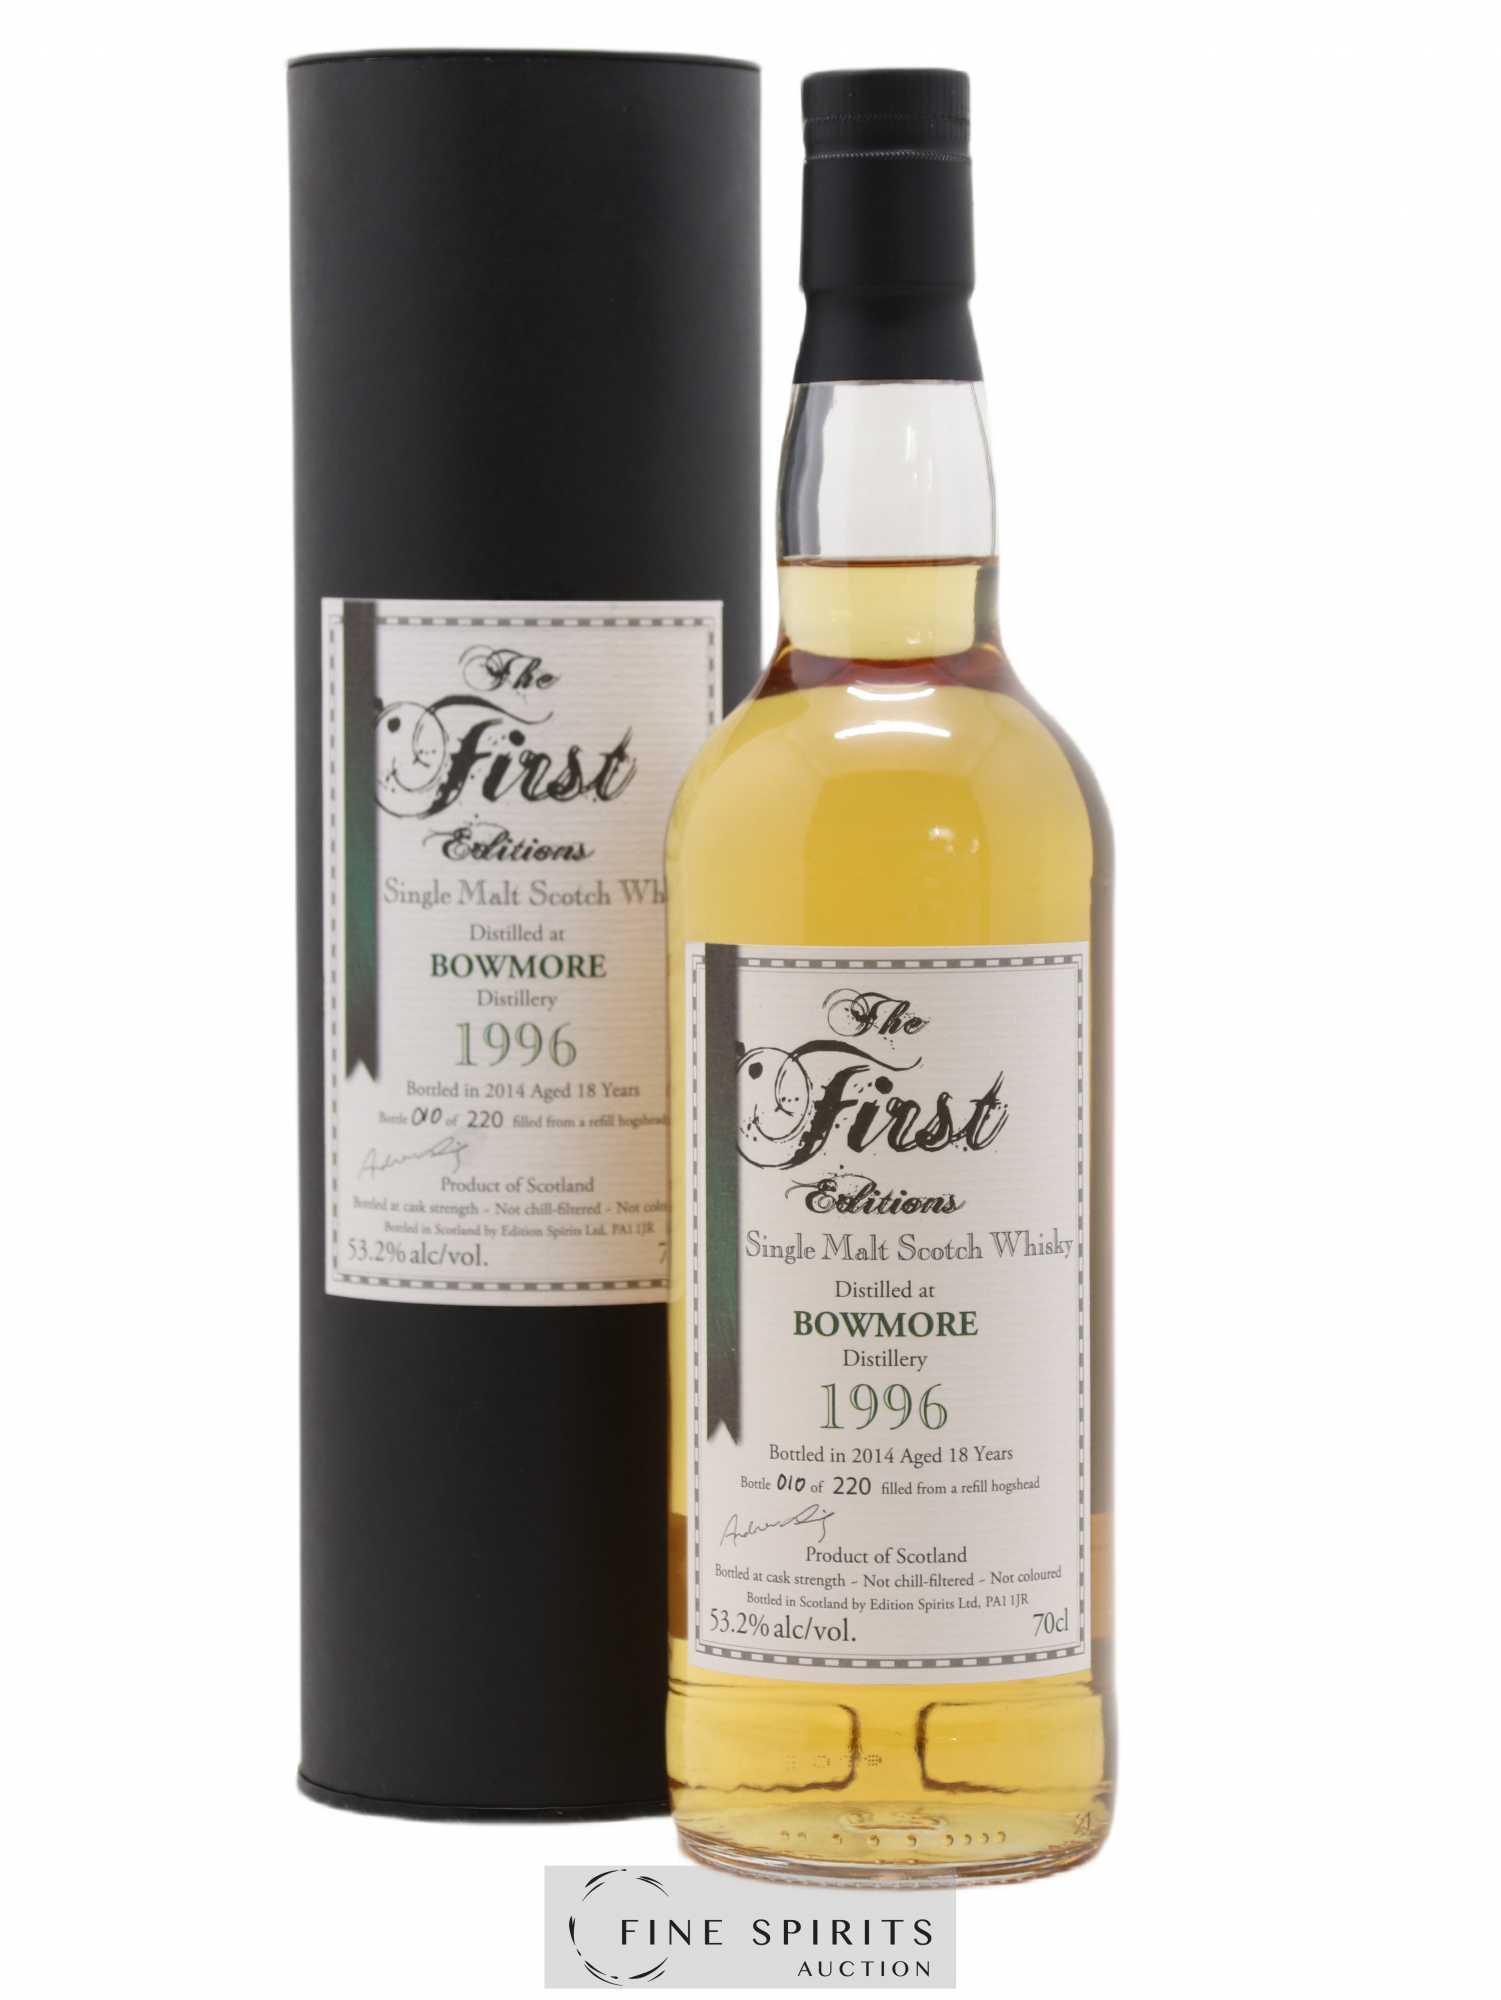 Bowmore 18 years 1996 Edition Spirits Refill Hogshead - One of 220 - bottled 2014 The First Editions 